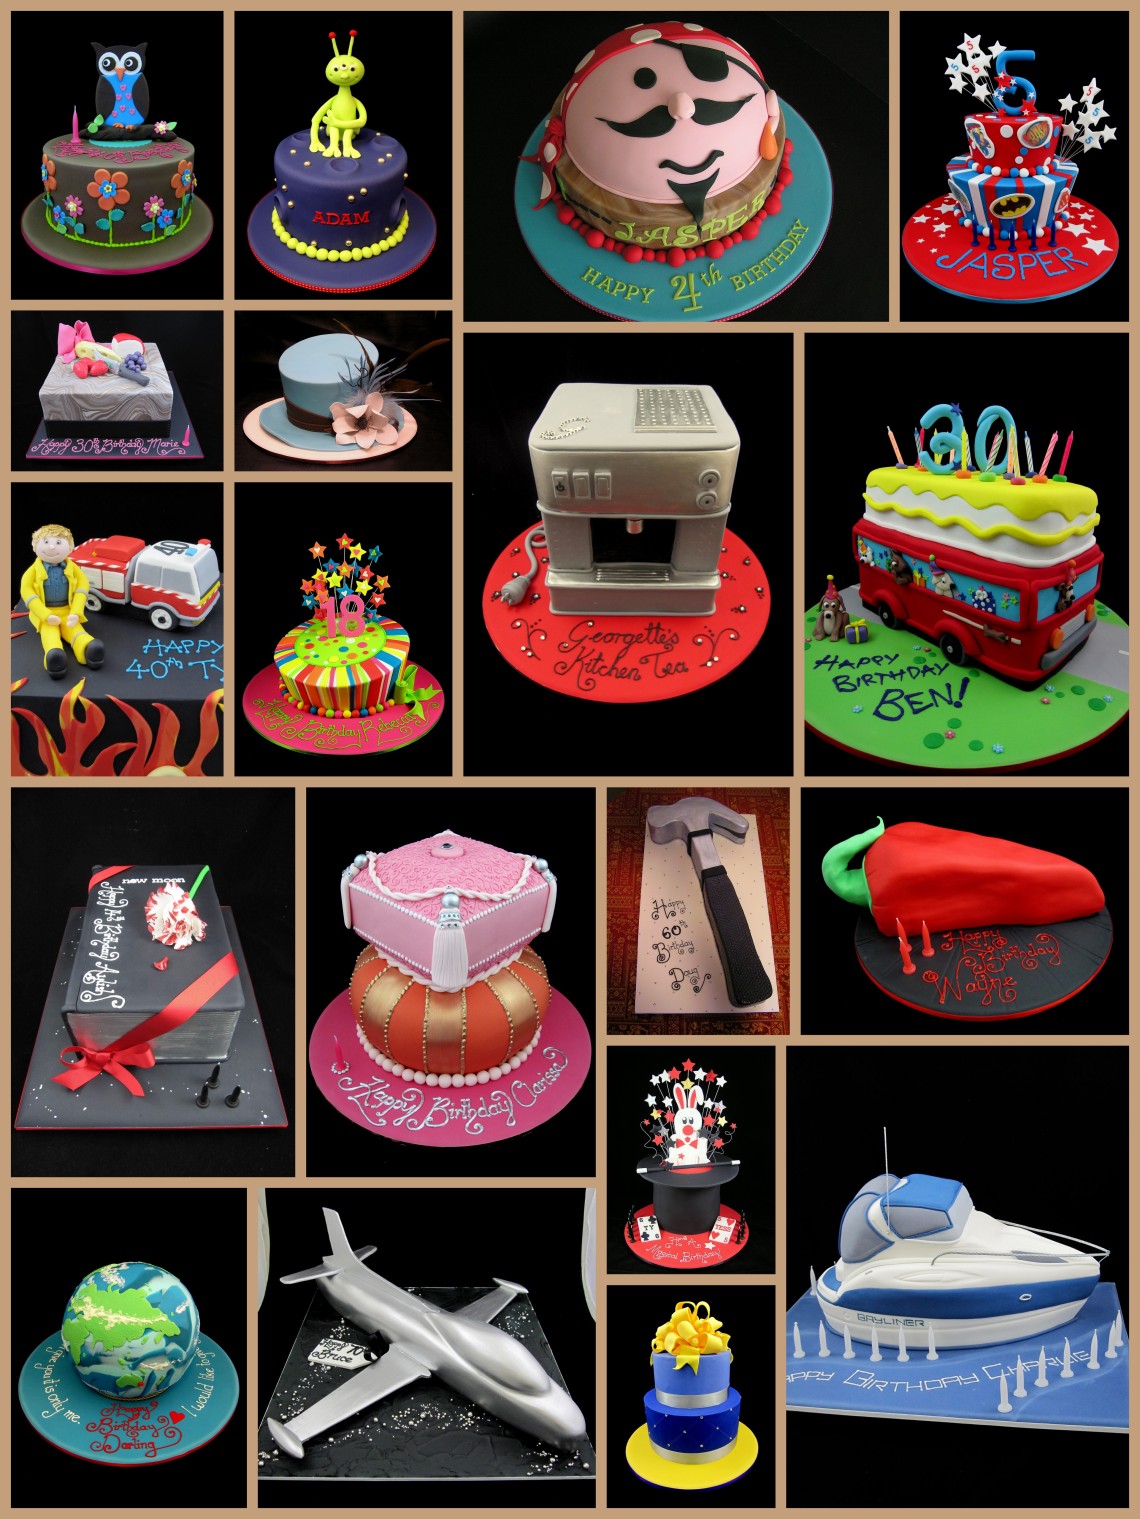 fun cake designs inspired by michelle cake designs